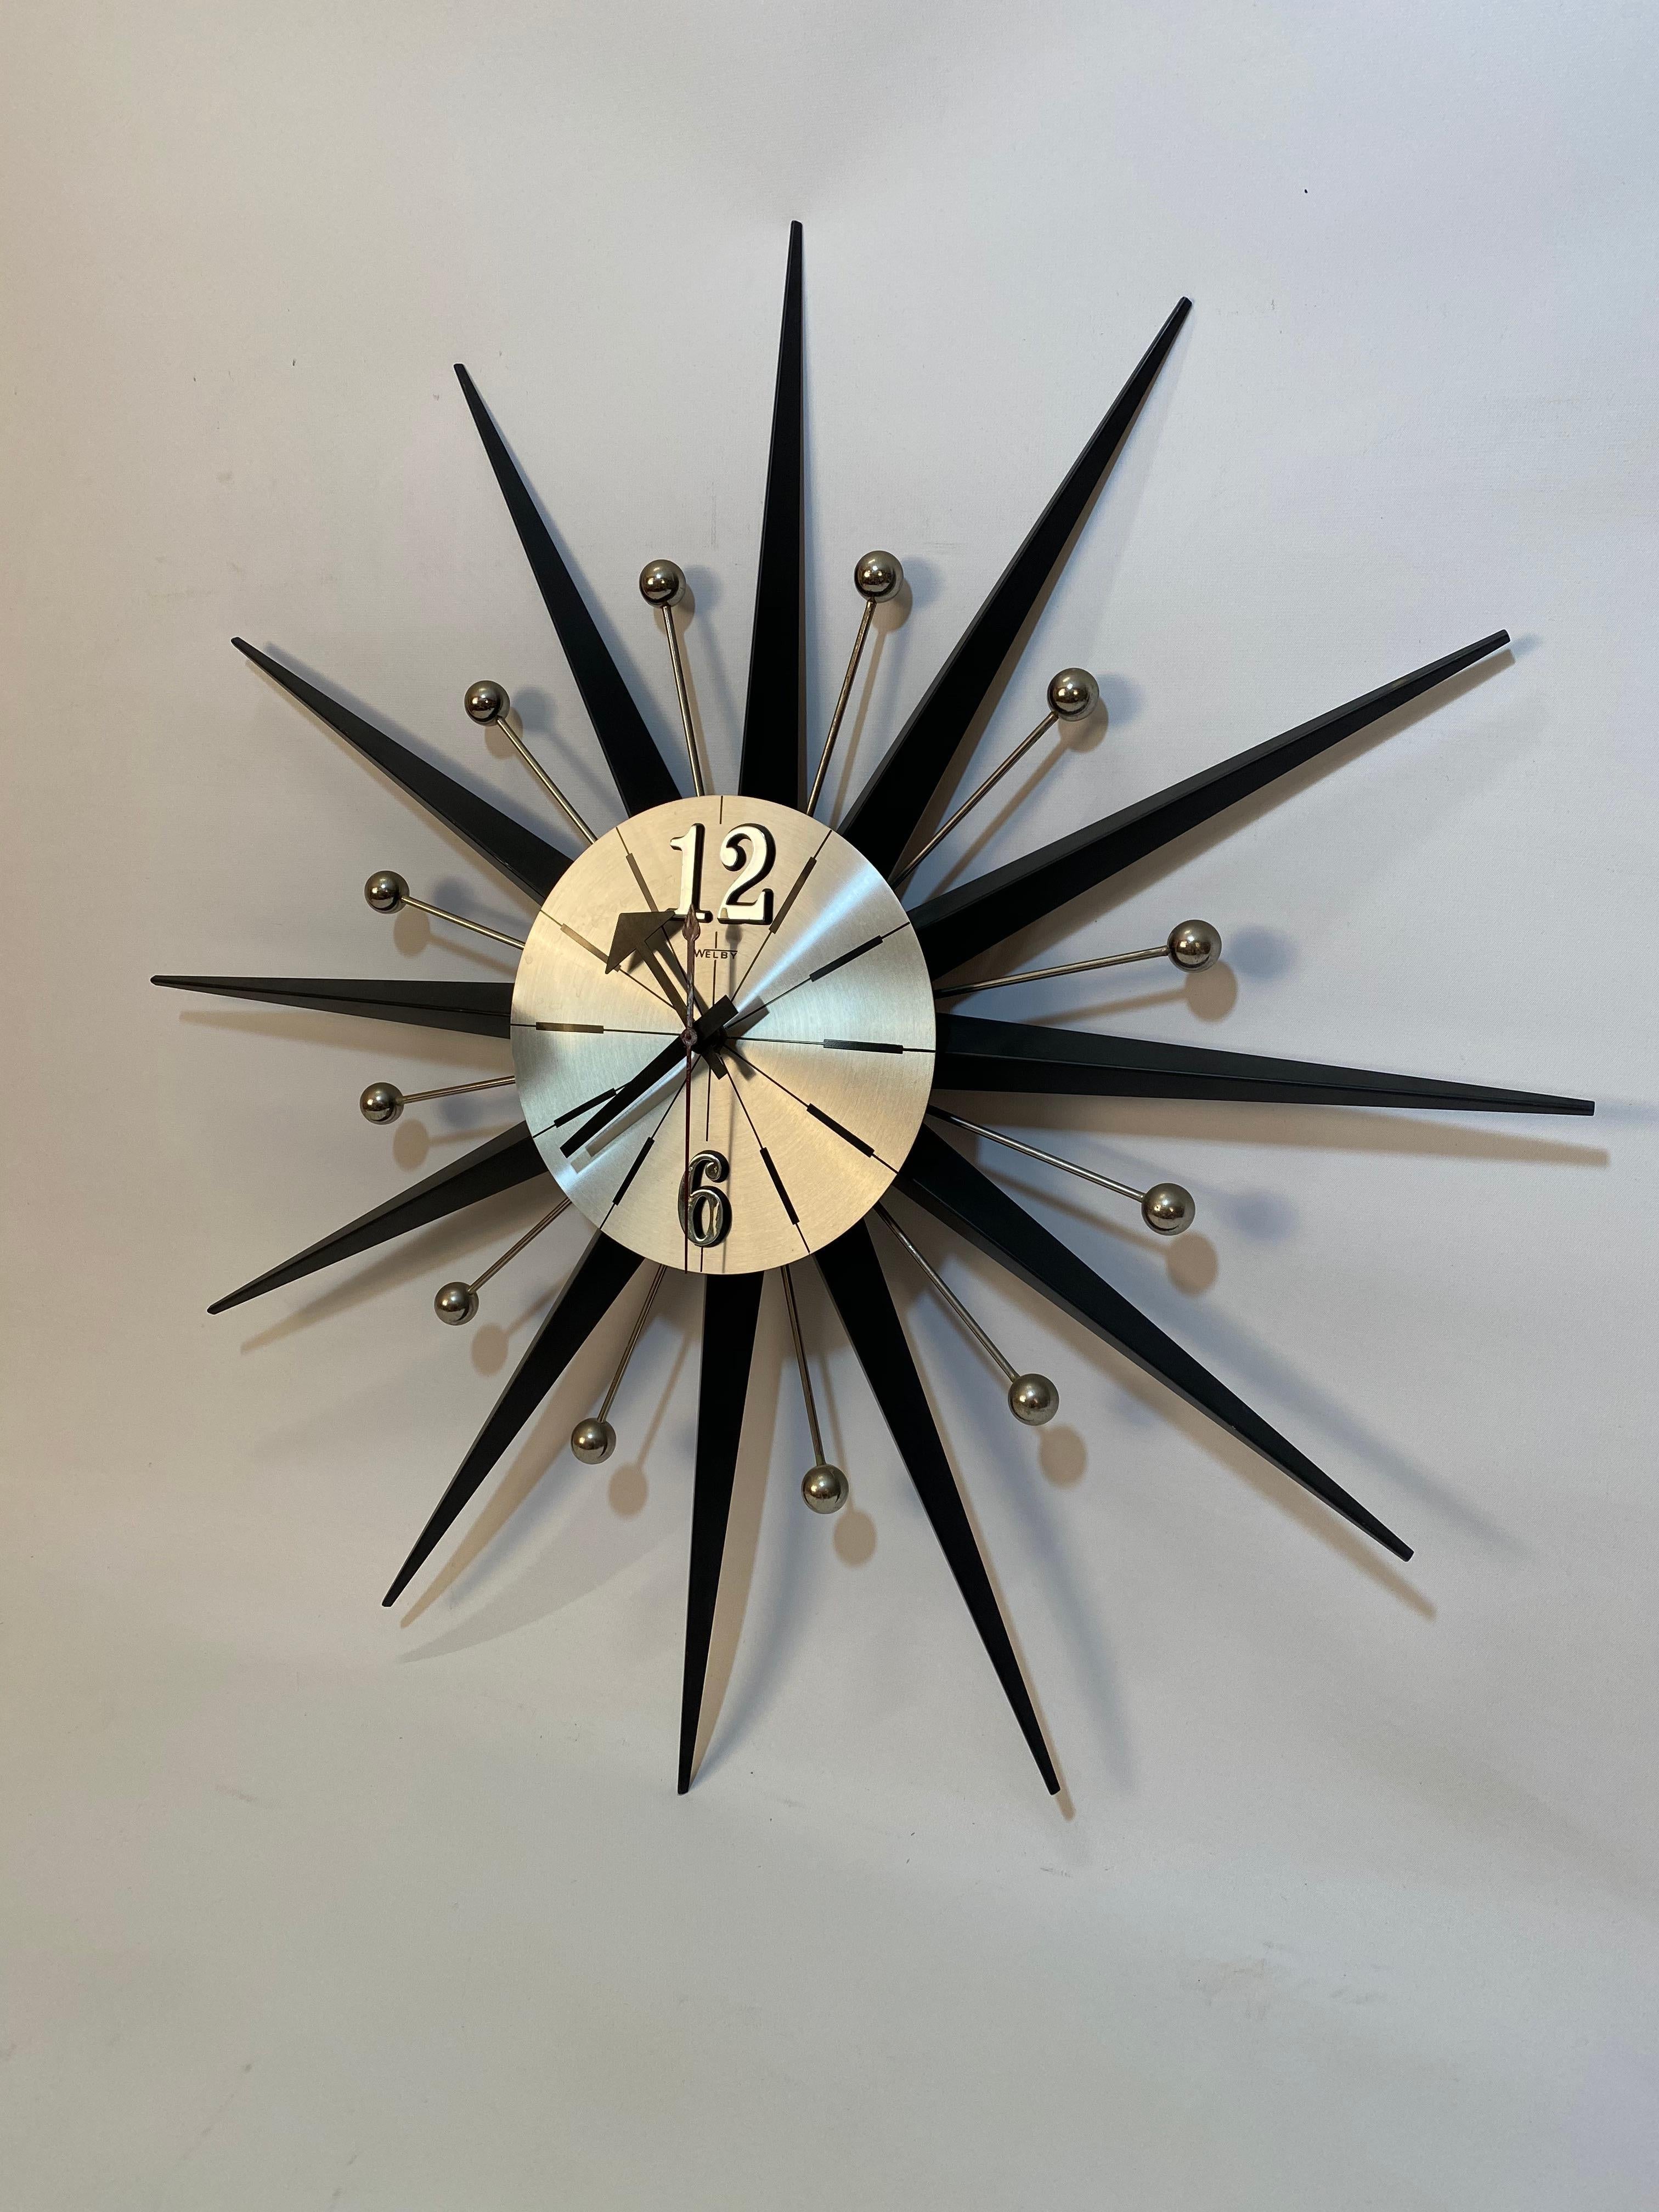 Welby sunburst wall clock. Black radiating arms with black numbers hour and minute hands on a brushed aluminum clock face, circa 1960. Battery powered (Battery C). Good working condition. No visible losses, scratches. Black arms are